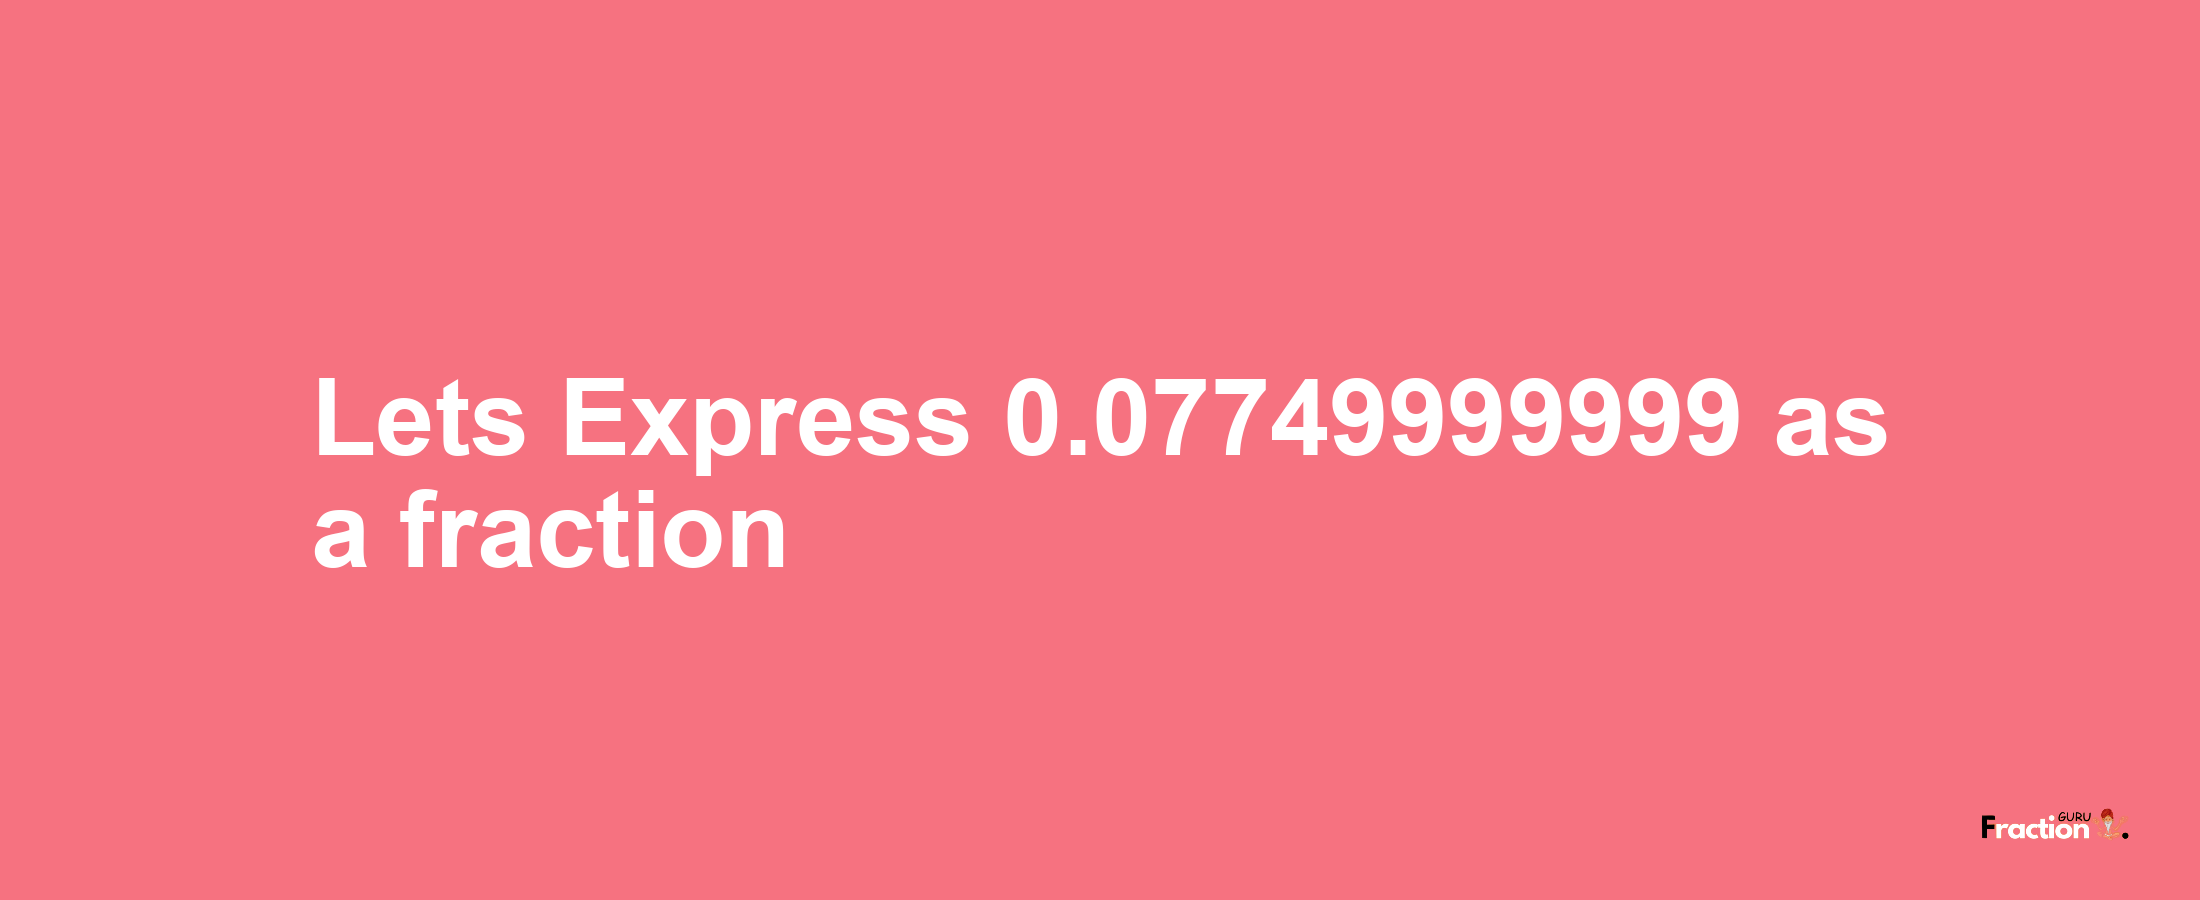 Lets Express 0.07749999999 as afraction